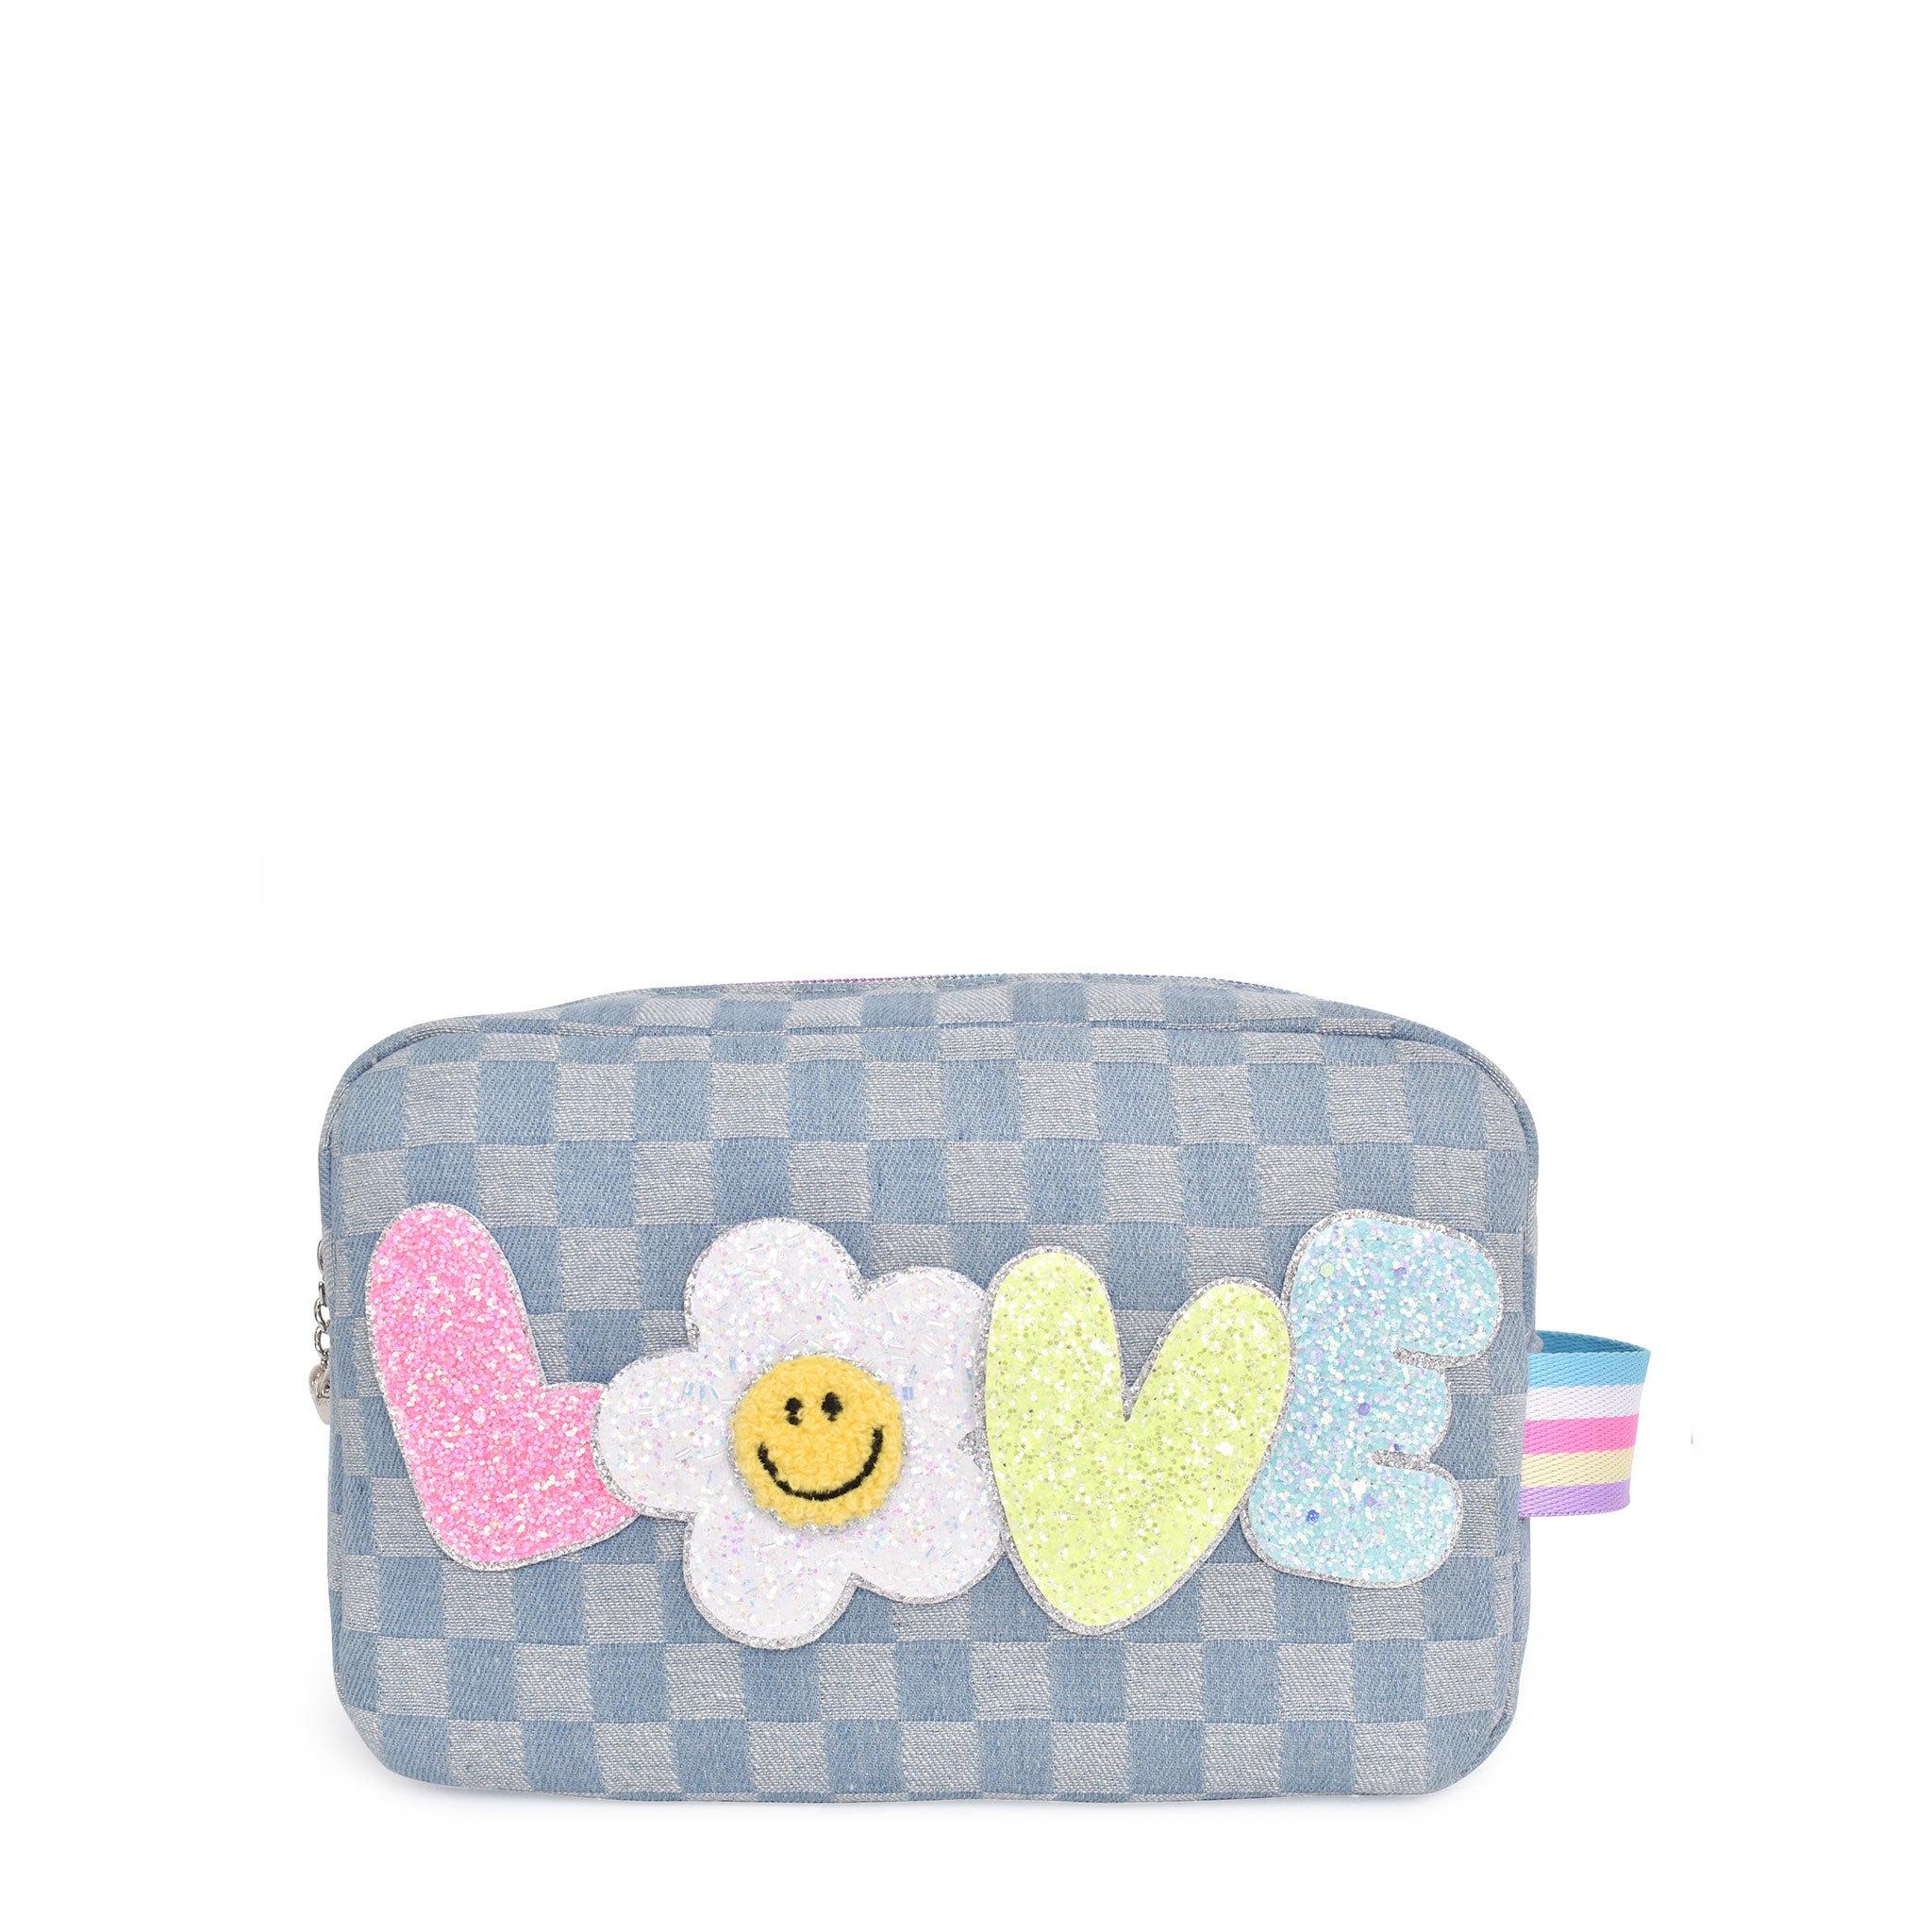 Front view of a denim checkered pouch with glitter bubble letters 'LOVE' and smiley face daisy patch